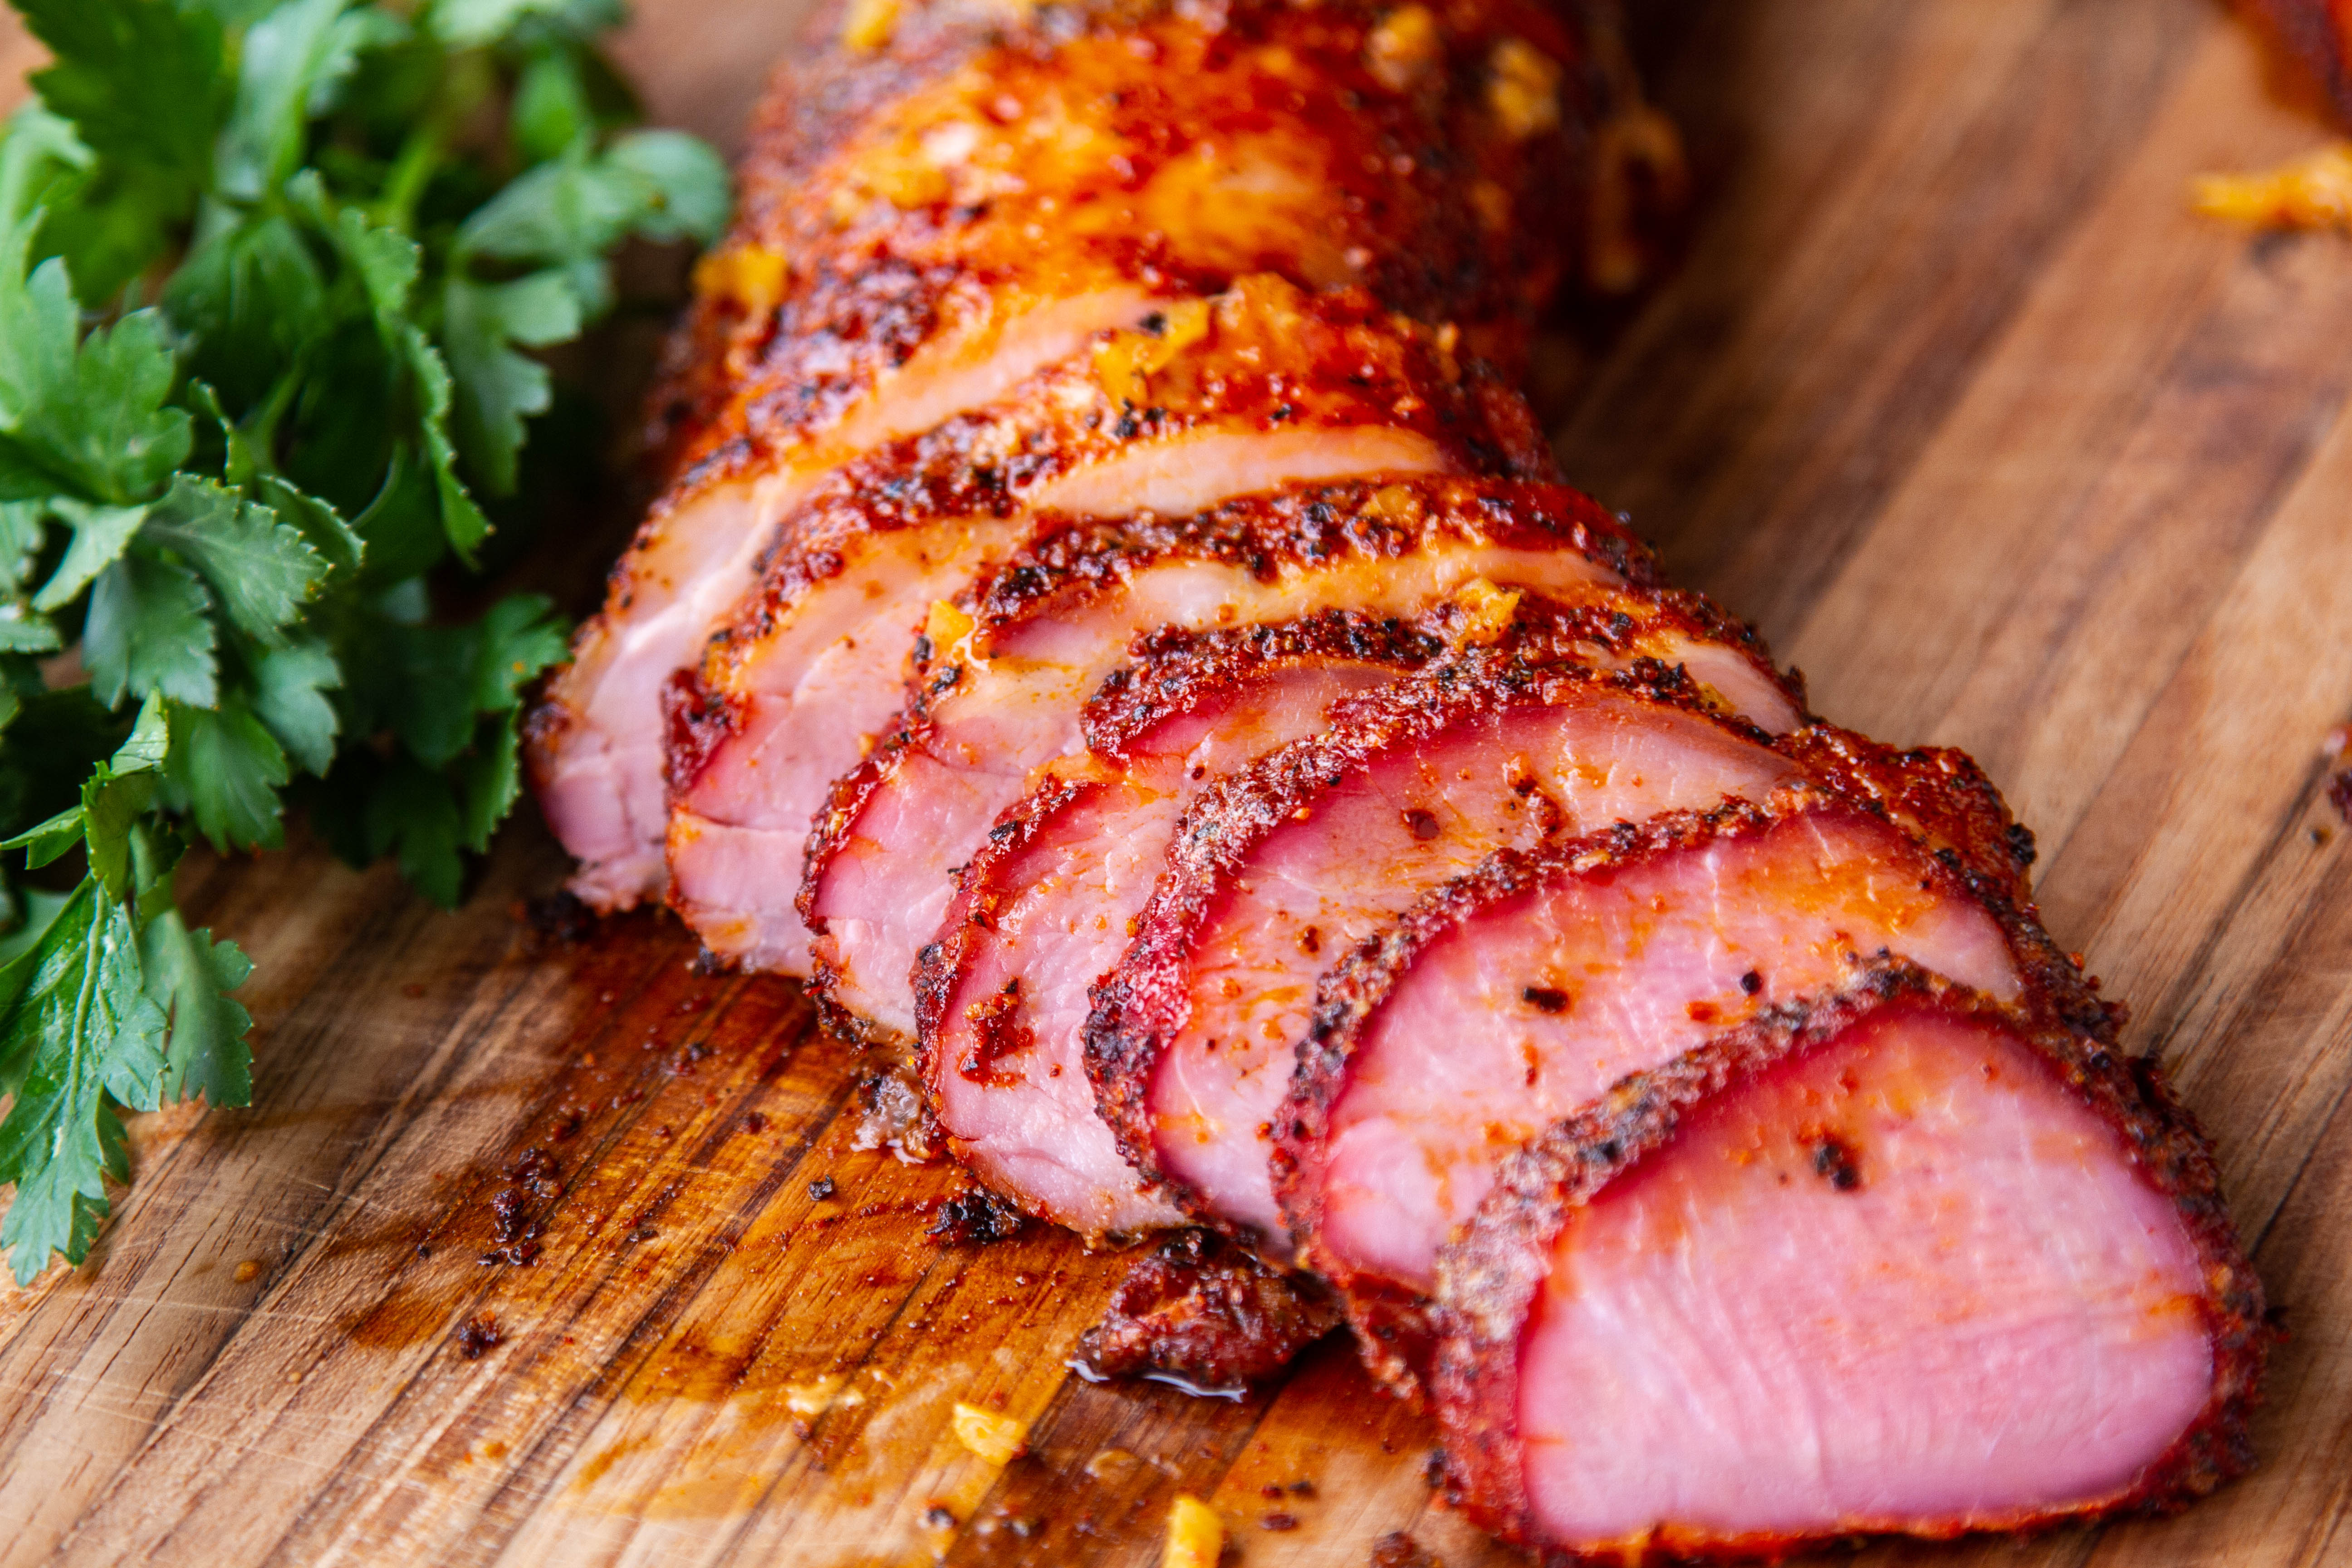 Pork tenderloin recipe and doneness temps | ThermoWorks